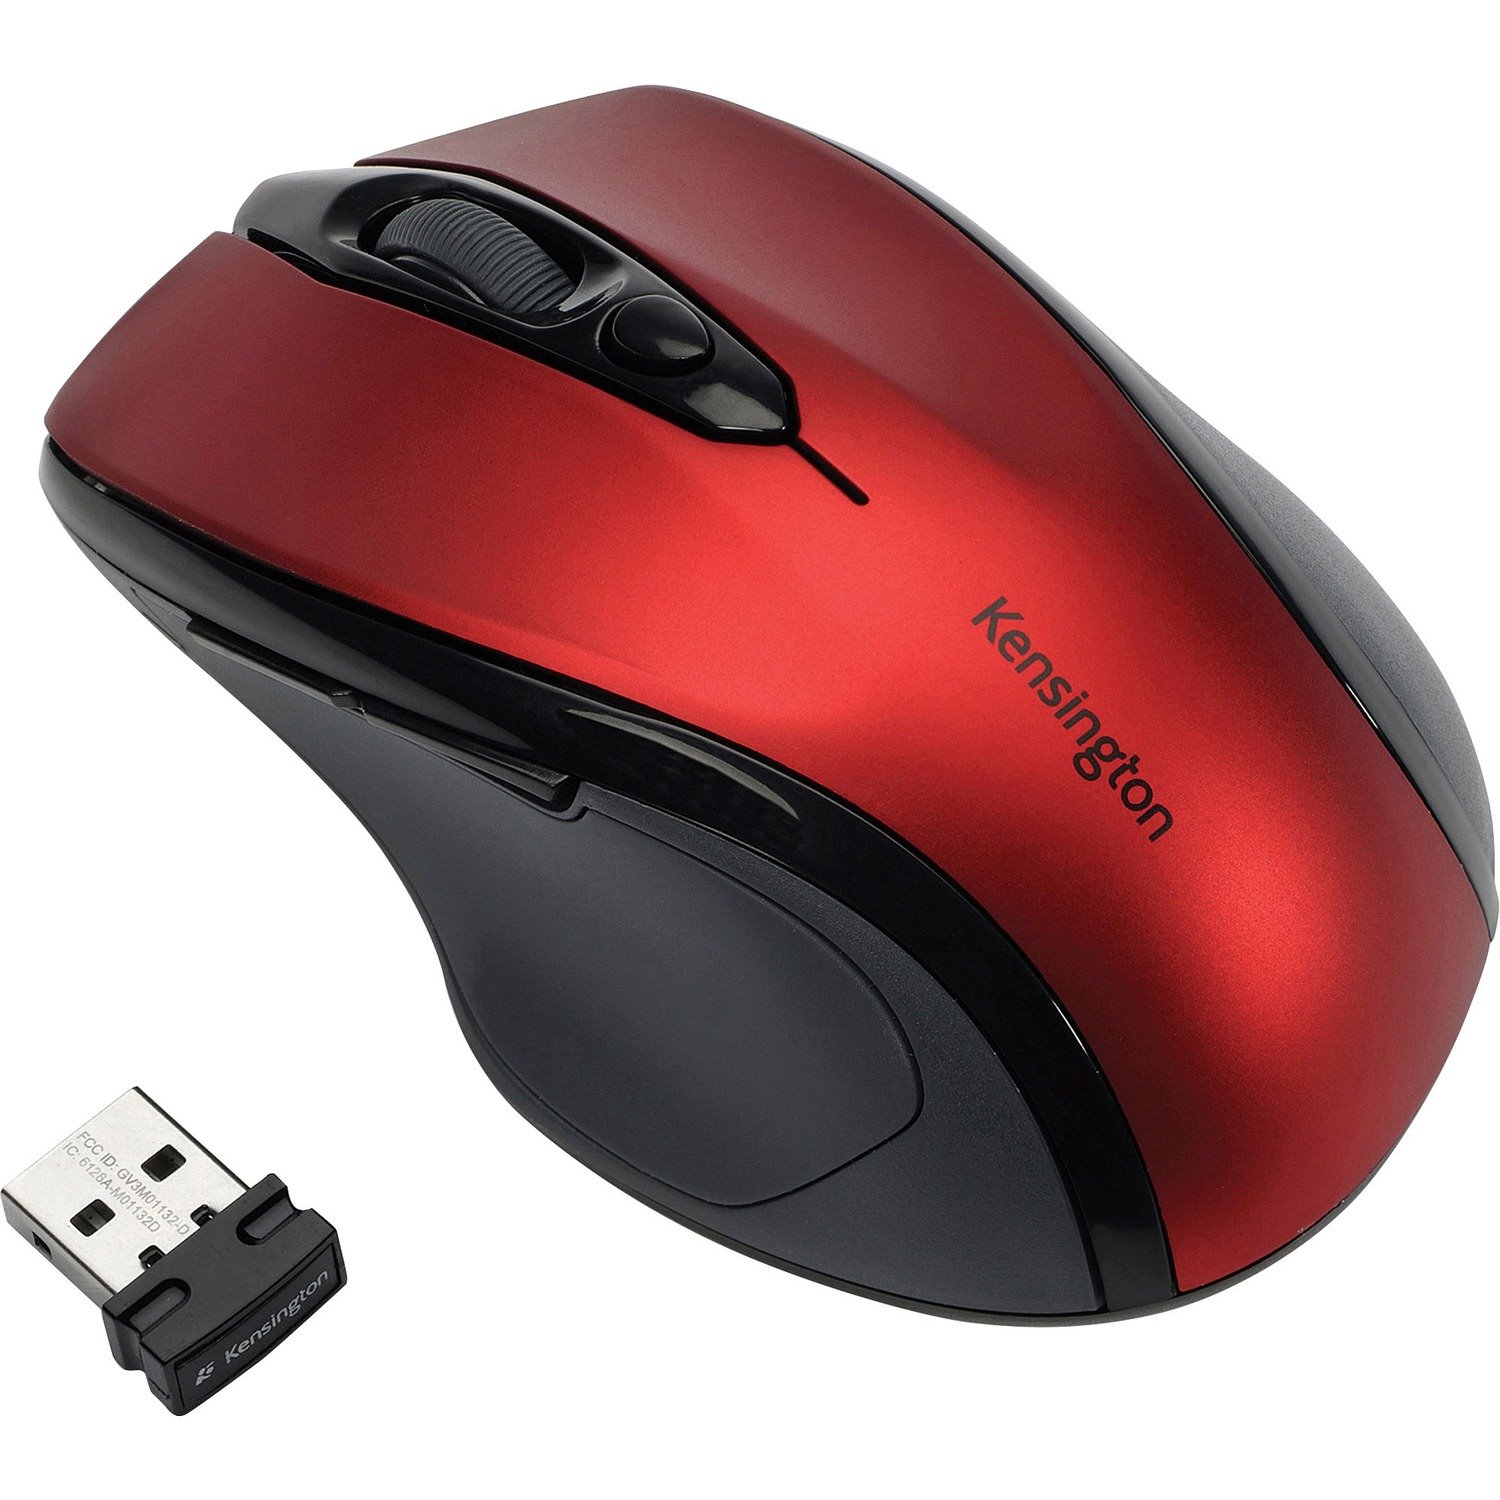 Kensington Pro Fit Mouse - Radio Frequency - USB - Optical - 3 Button(s) - Ruby Red